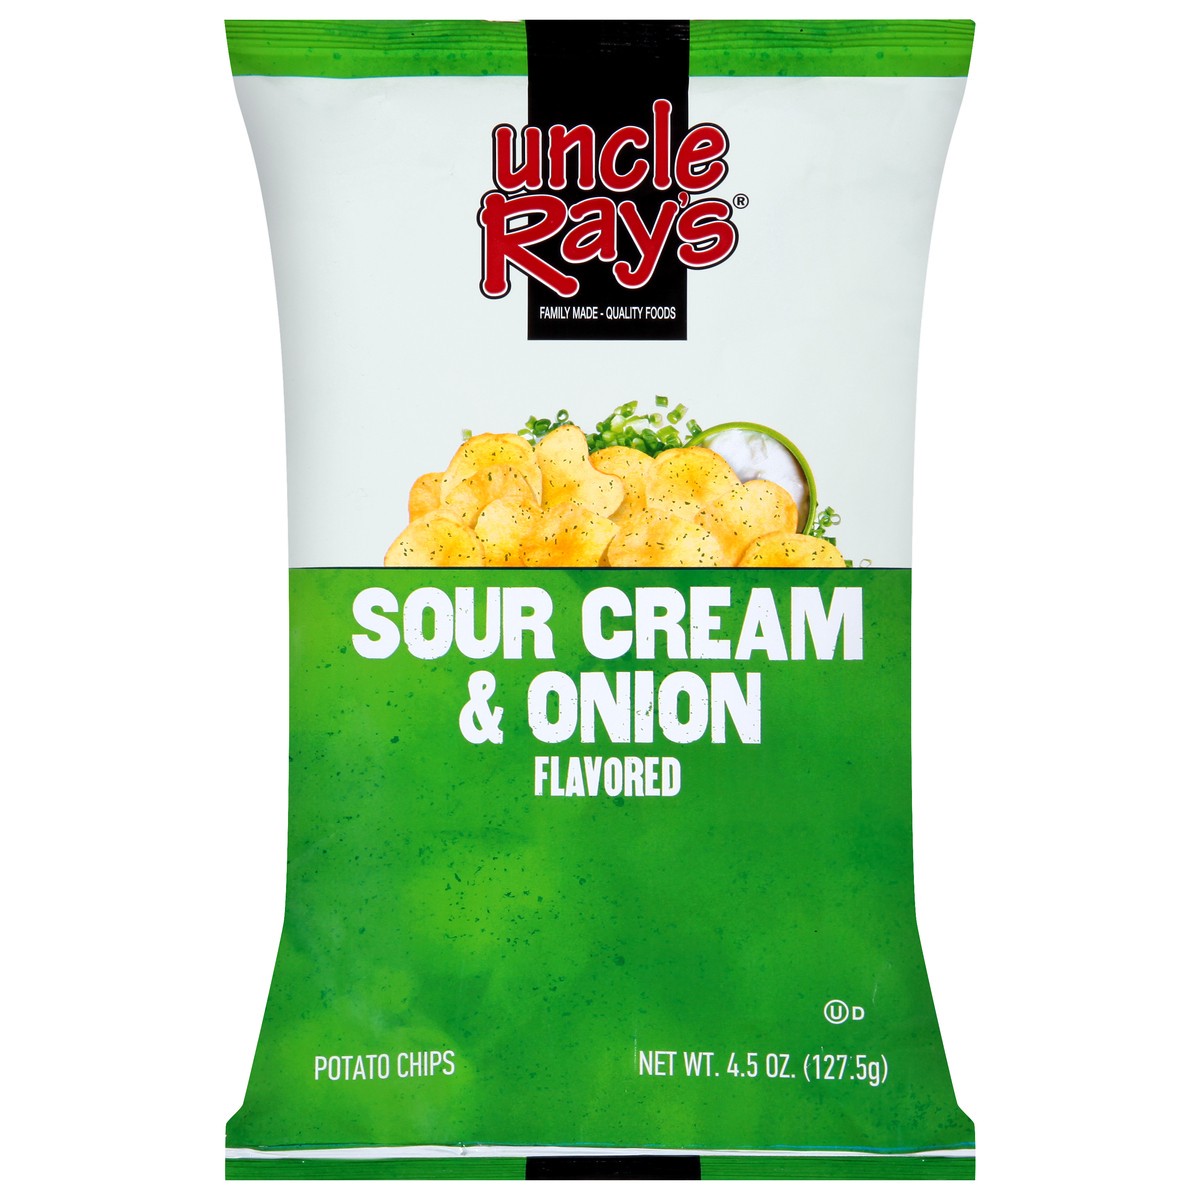 slide 1 of 13, Uncle Ray's Sour Cream & Onion Flavored Potato Chips 4.5 oz, 4.5 oz